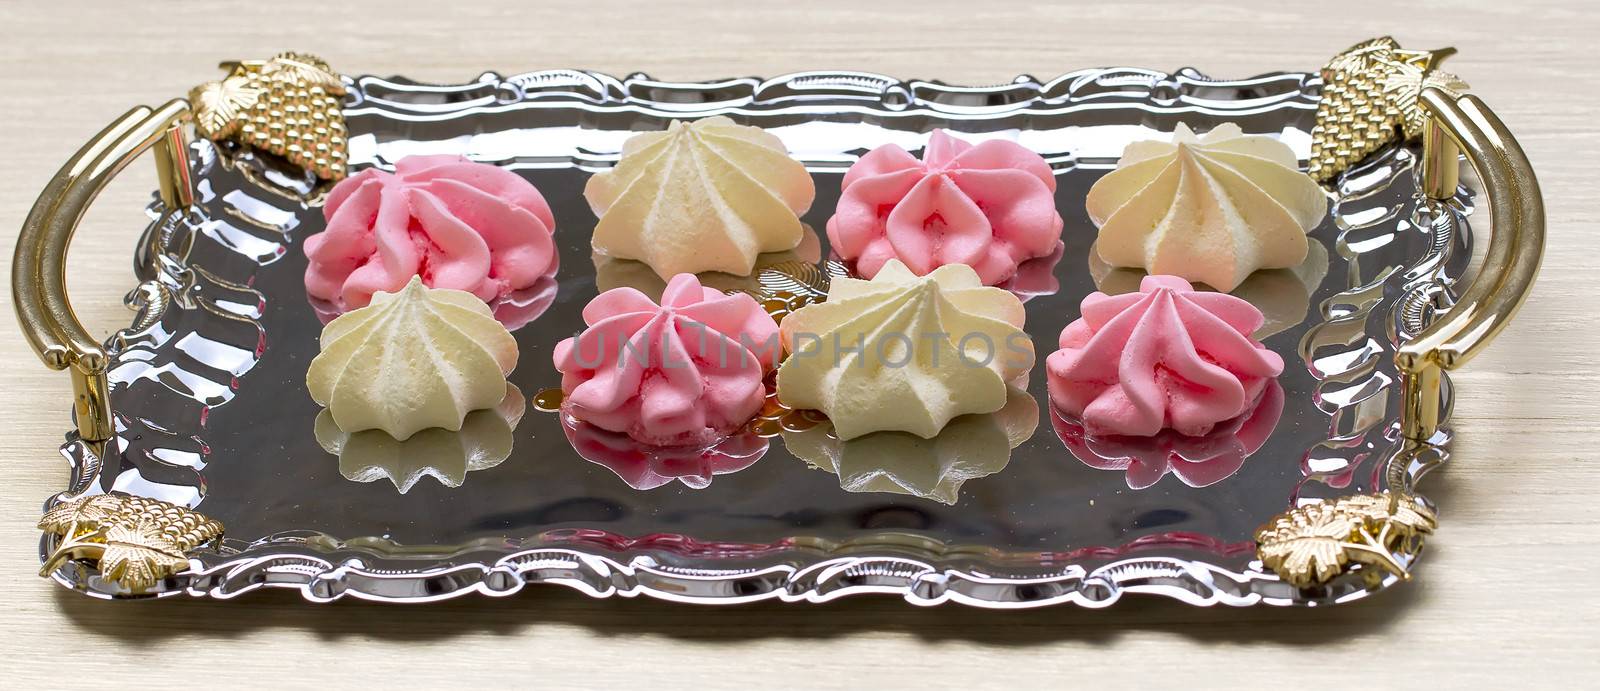 Yellow and pink meringues on a tray